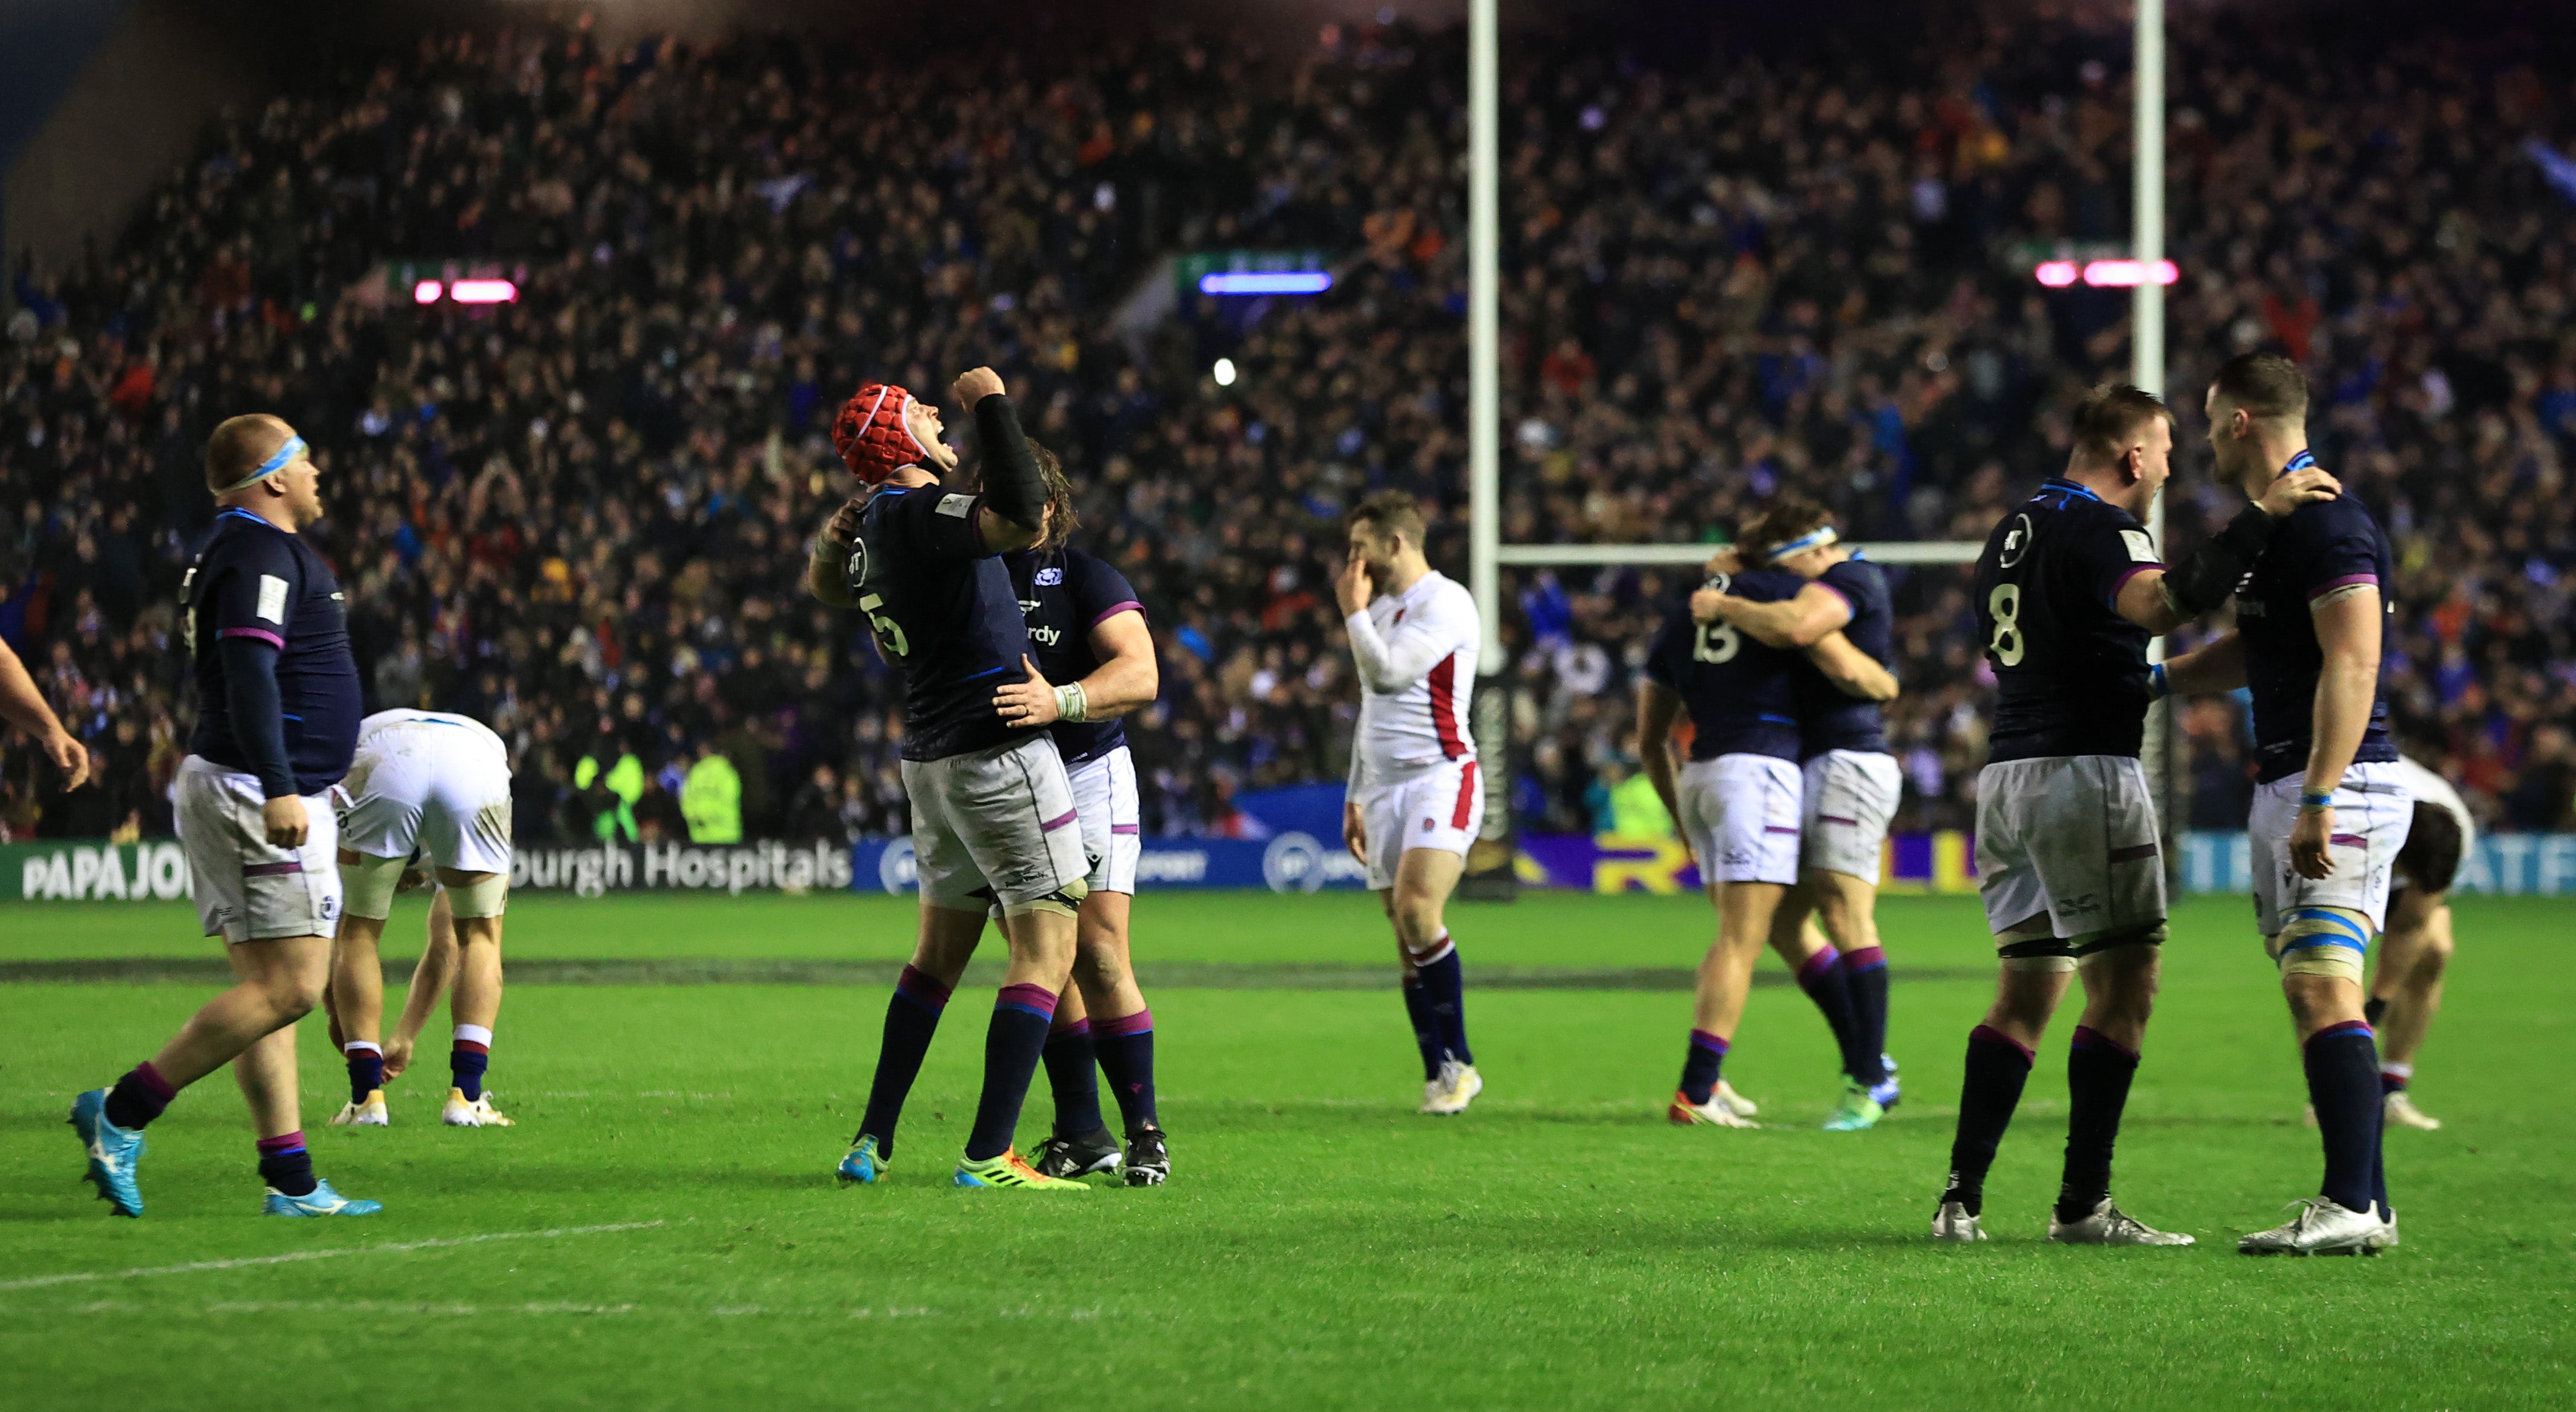 Scotland celebrate at the full-time whistle